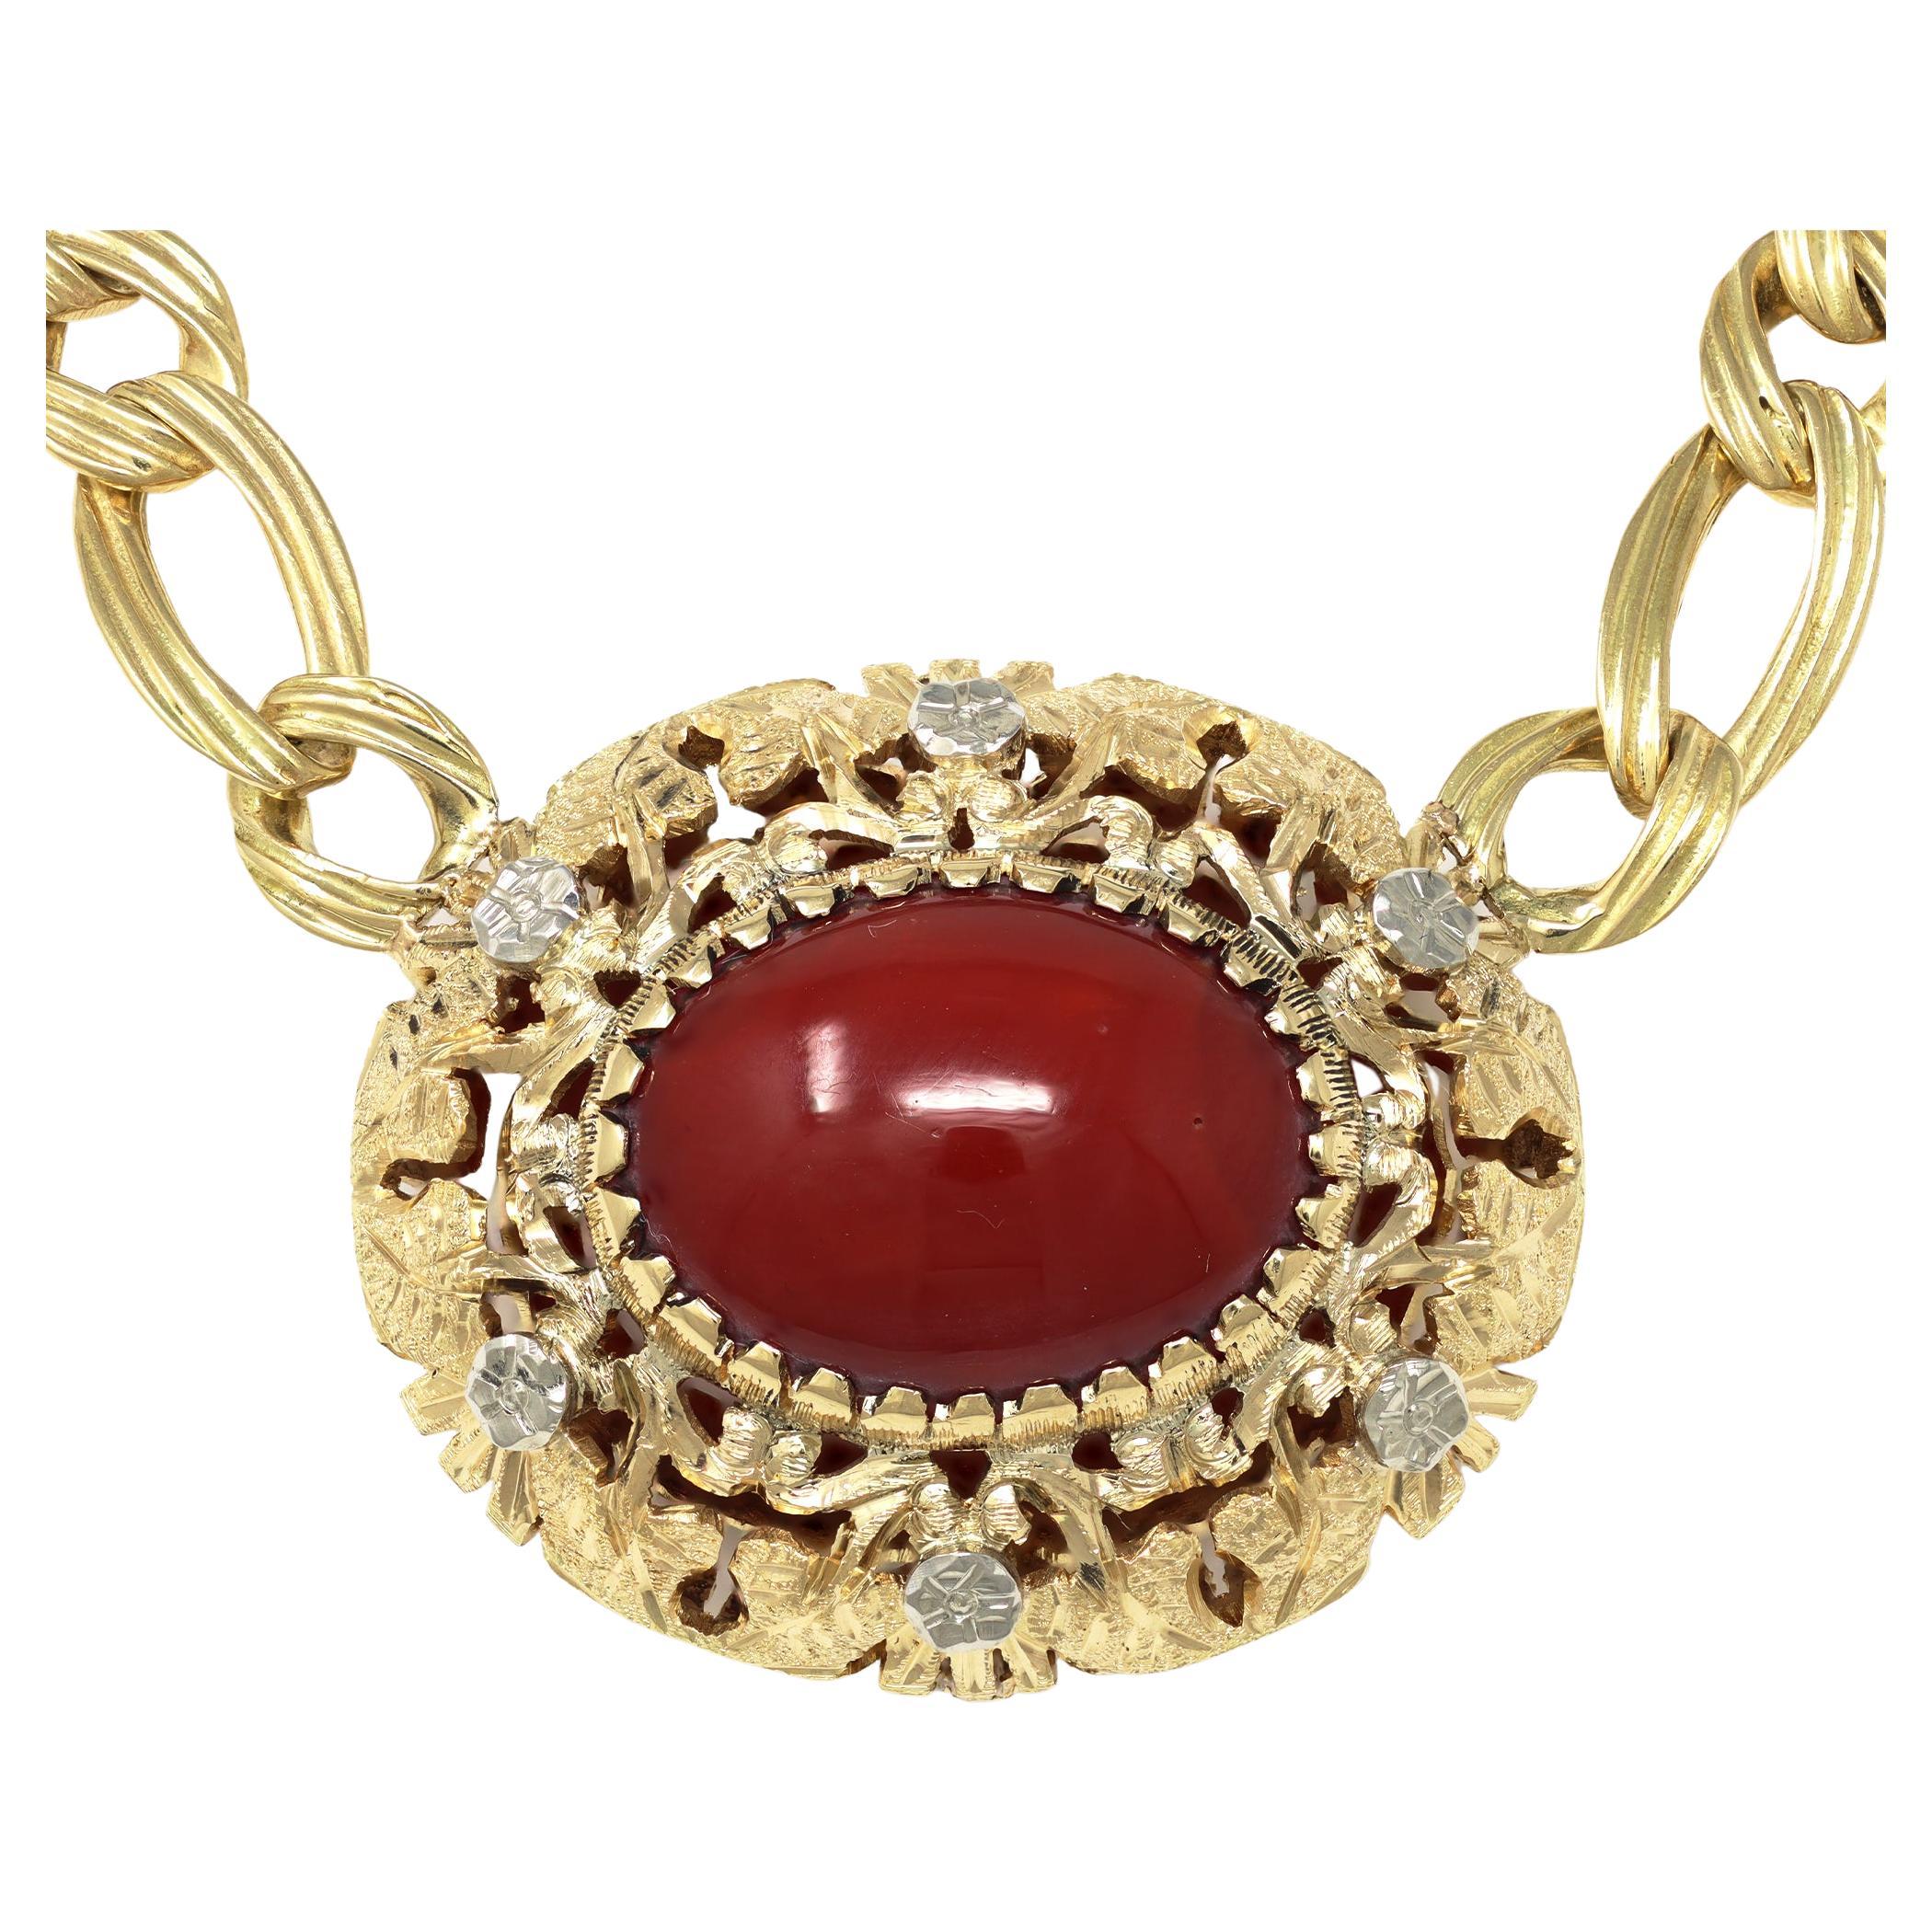 1960s Gold Necklace with Cabochon Oxblood Coral Center